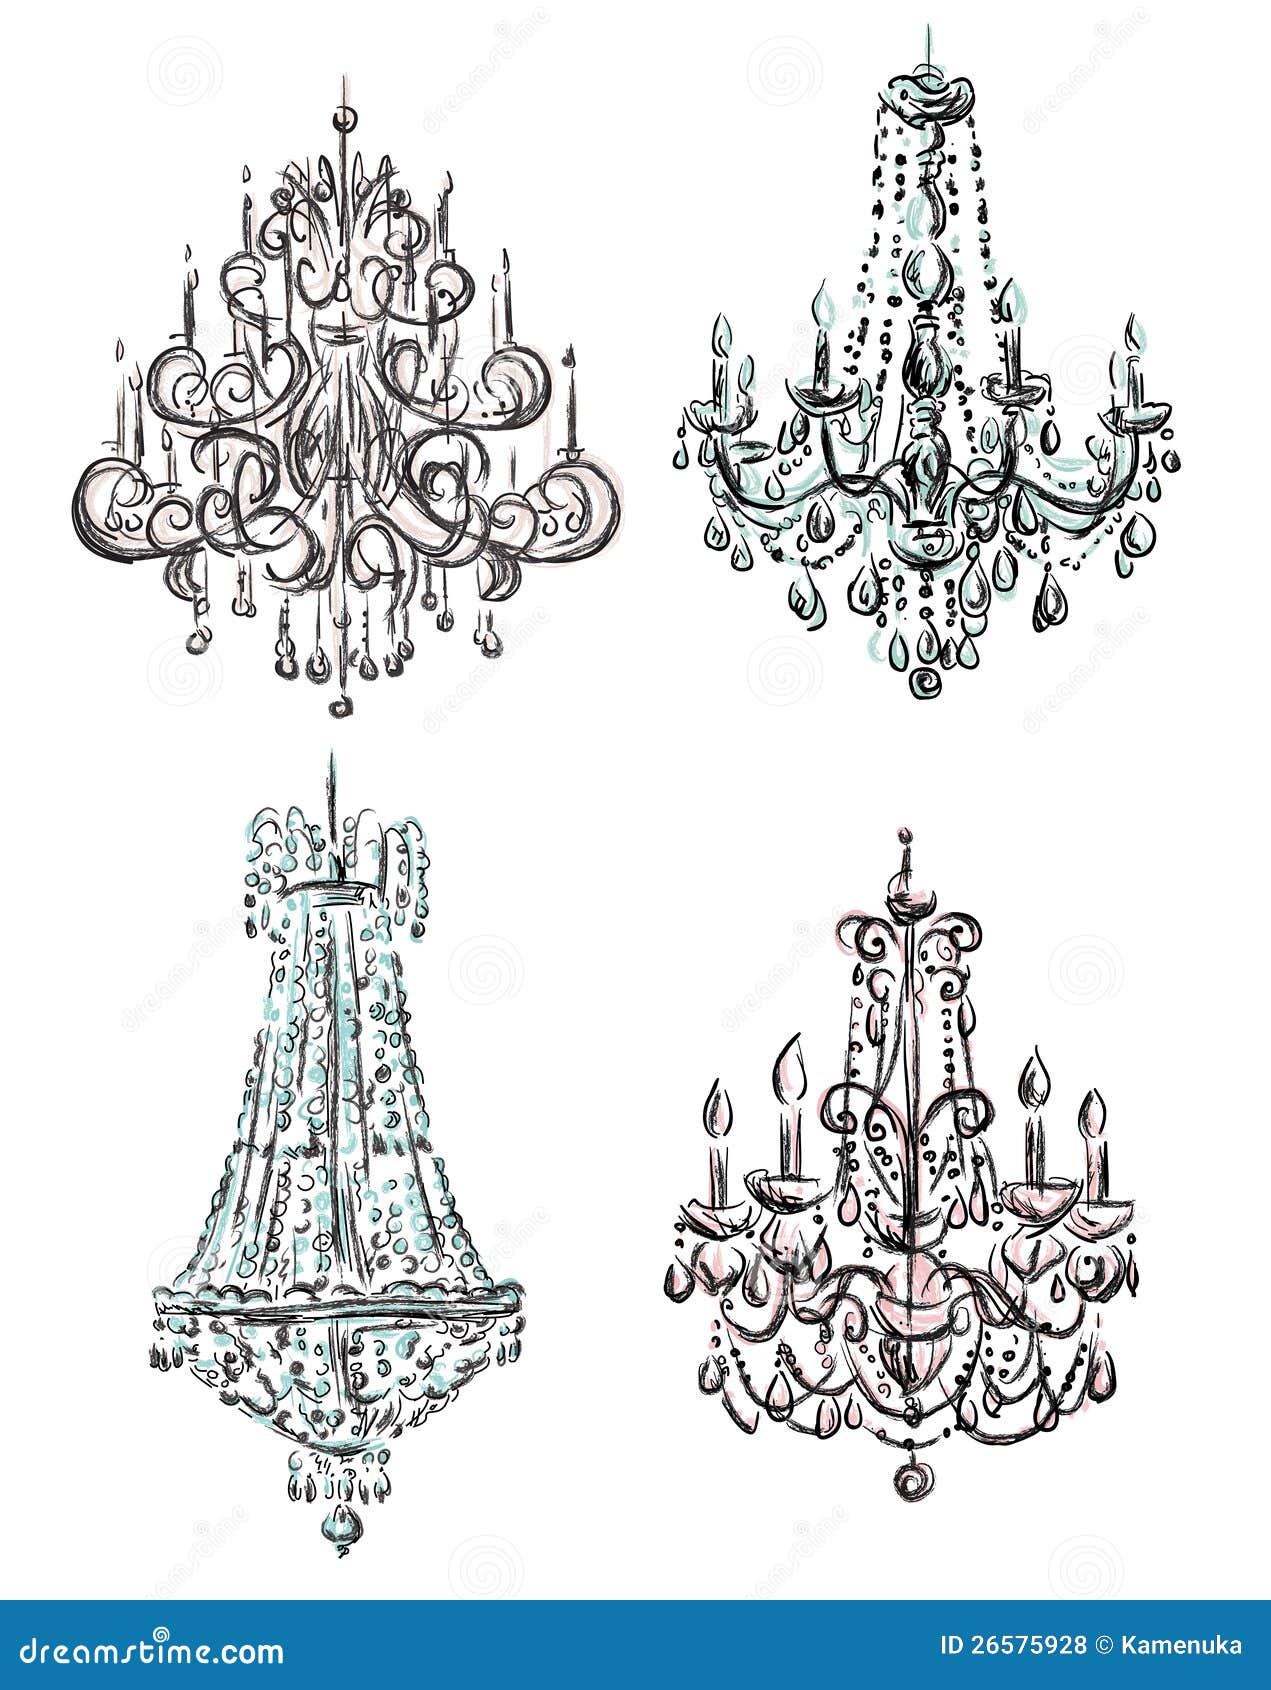 Set Of Chandelier Drawings Royalty Free Stock Photos - Image: 26575928